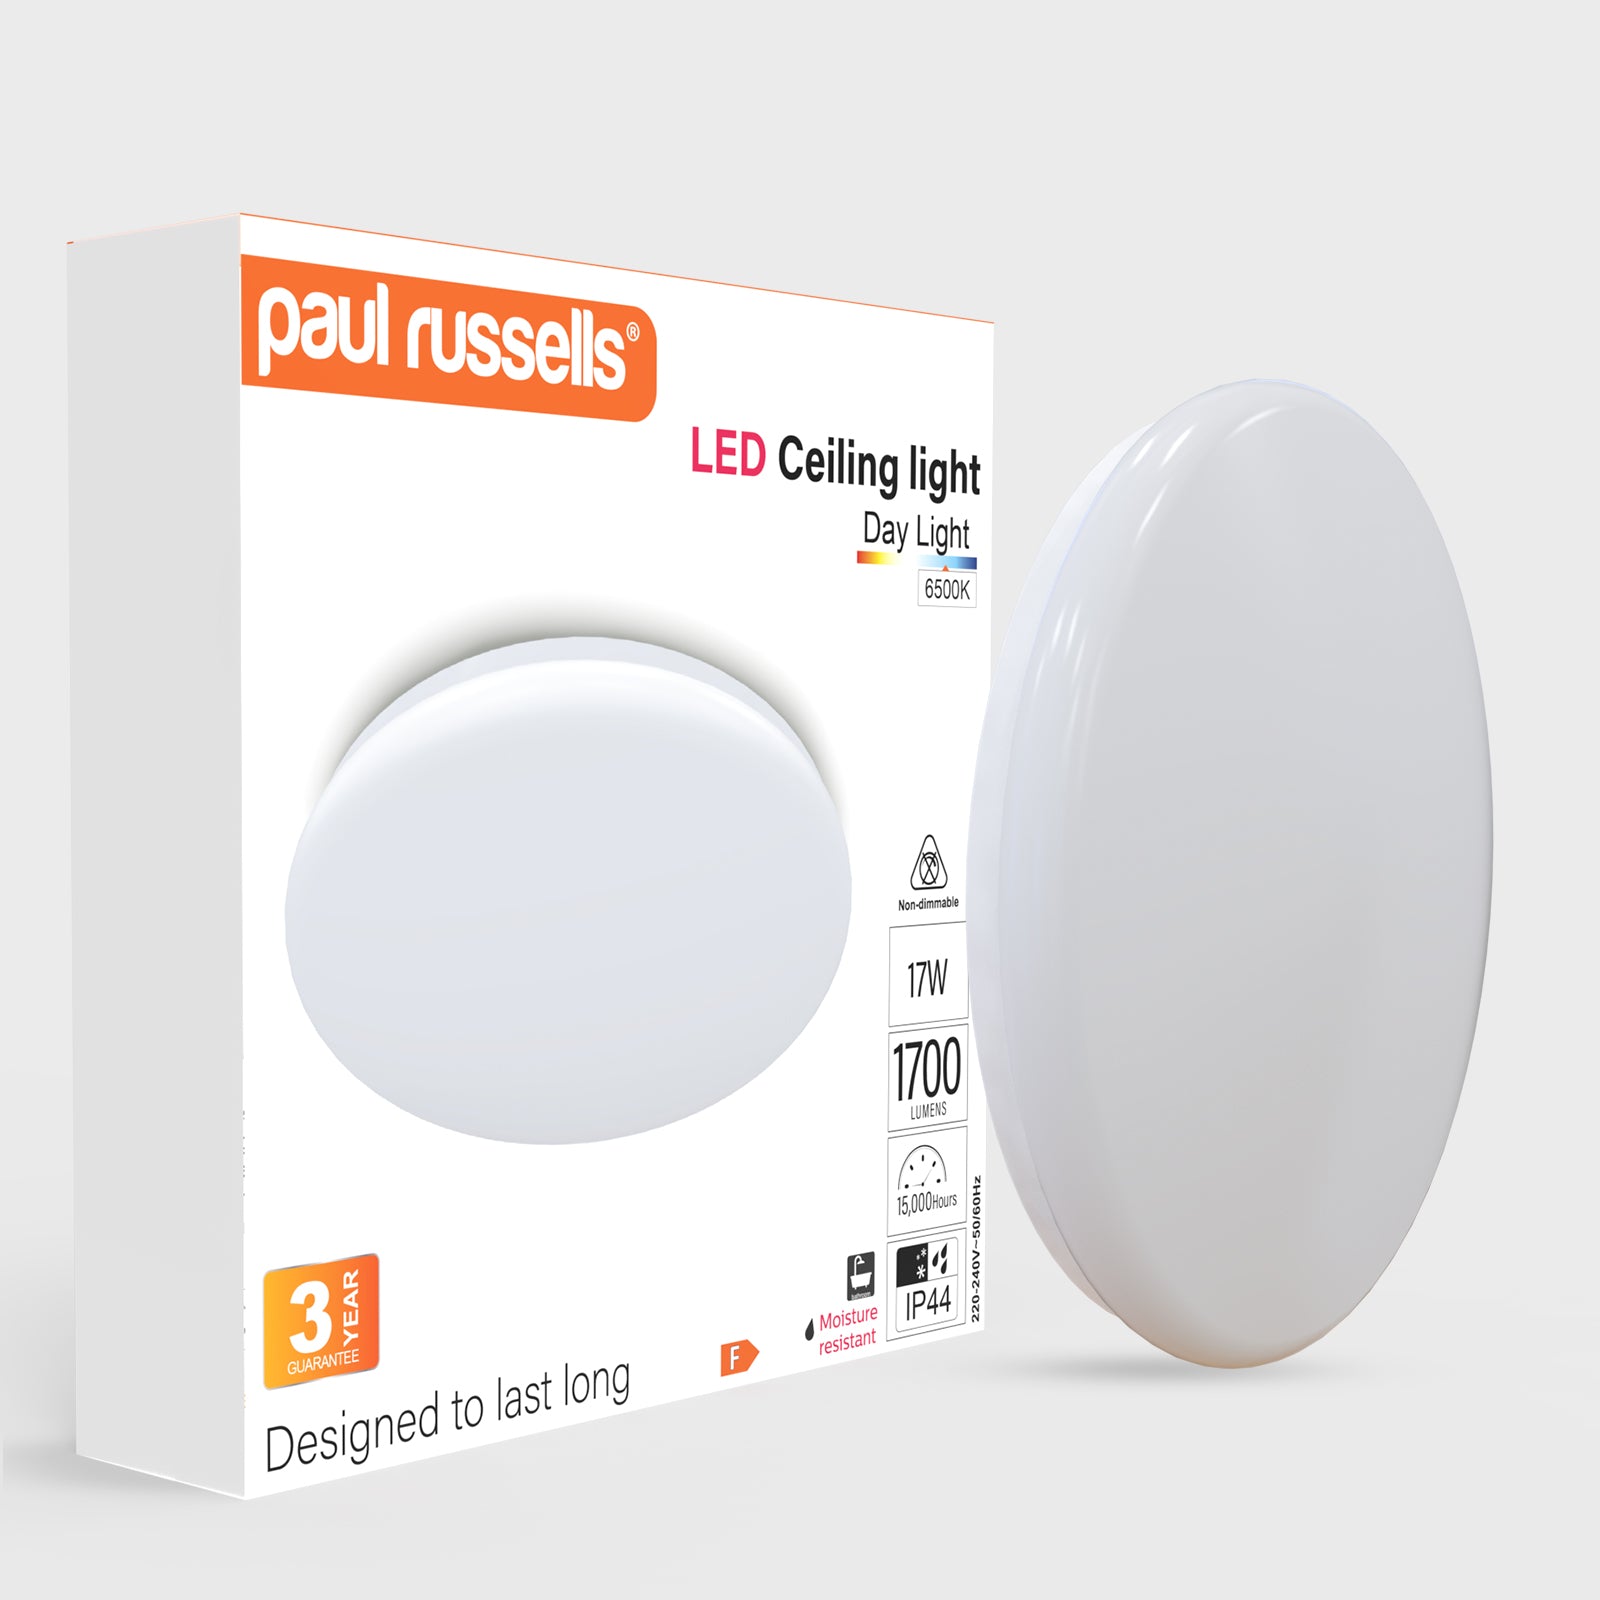 17W, LED Round Ceiling Downlights, 100W Equivalent, IP44, 1700 Lumens, 6500K Day Light, Non-Dimmable Panel Spotlights